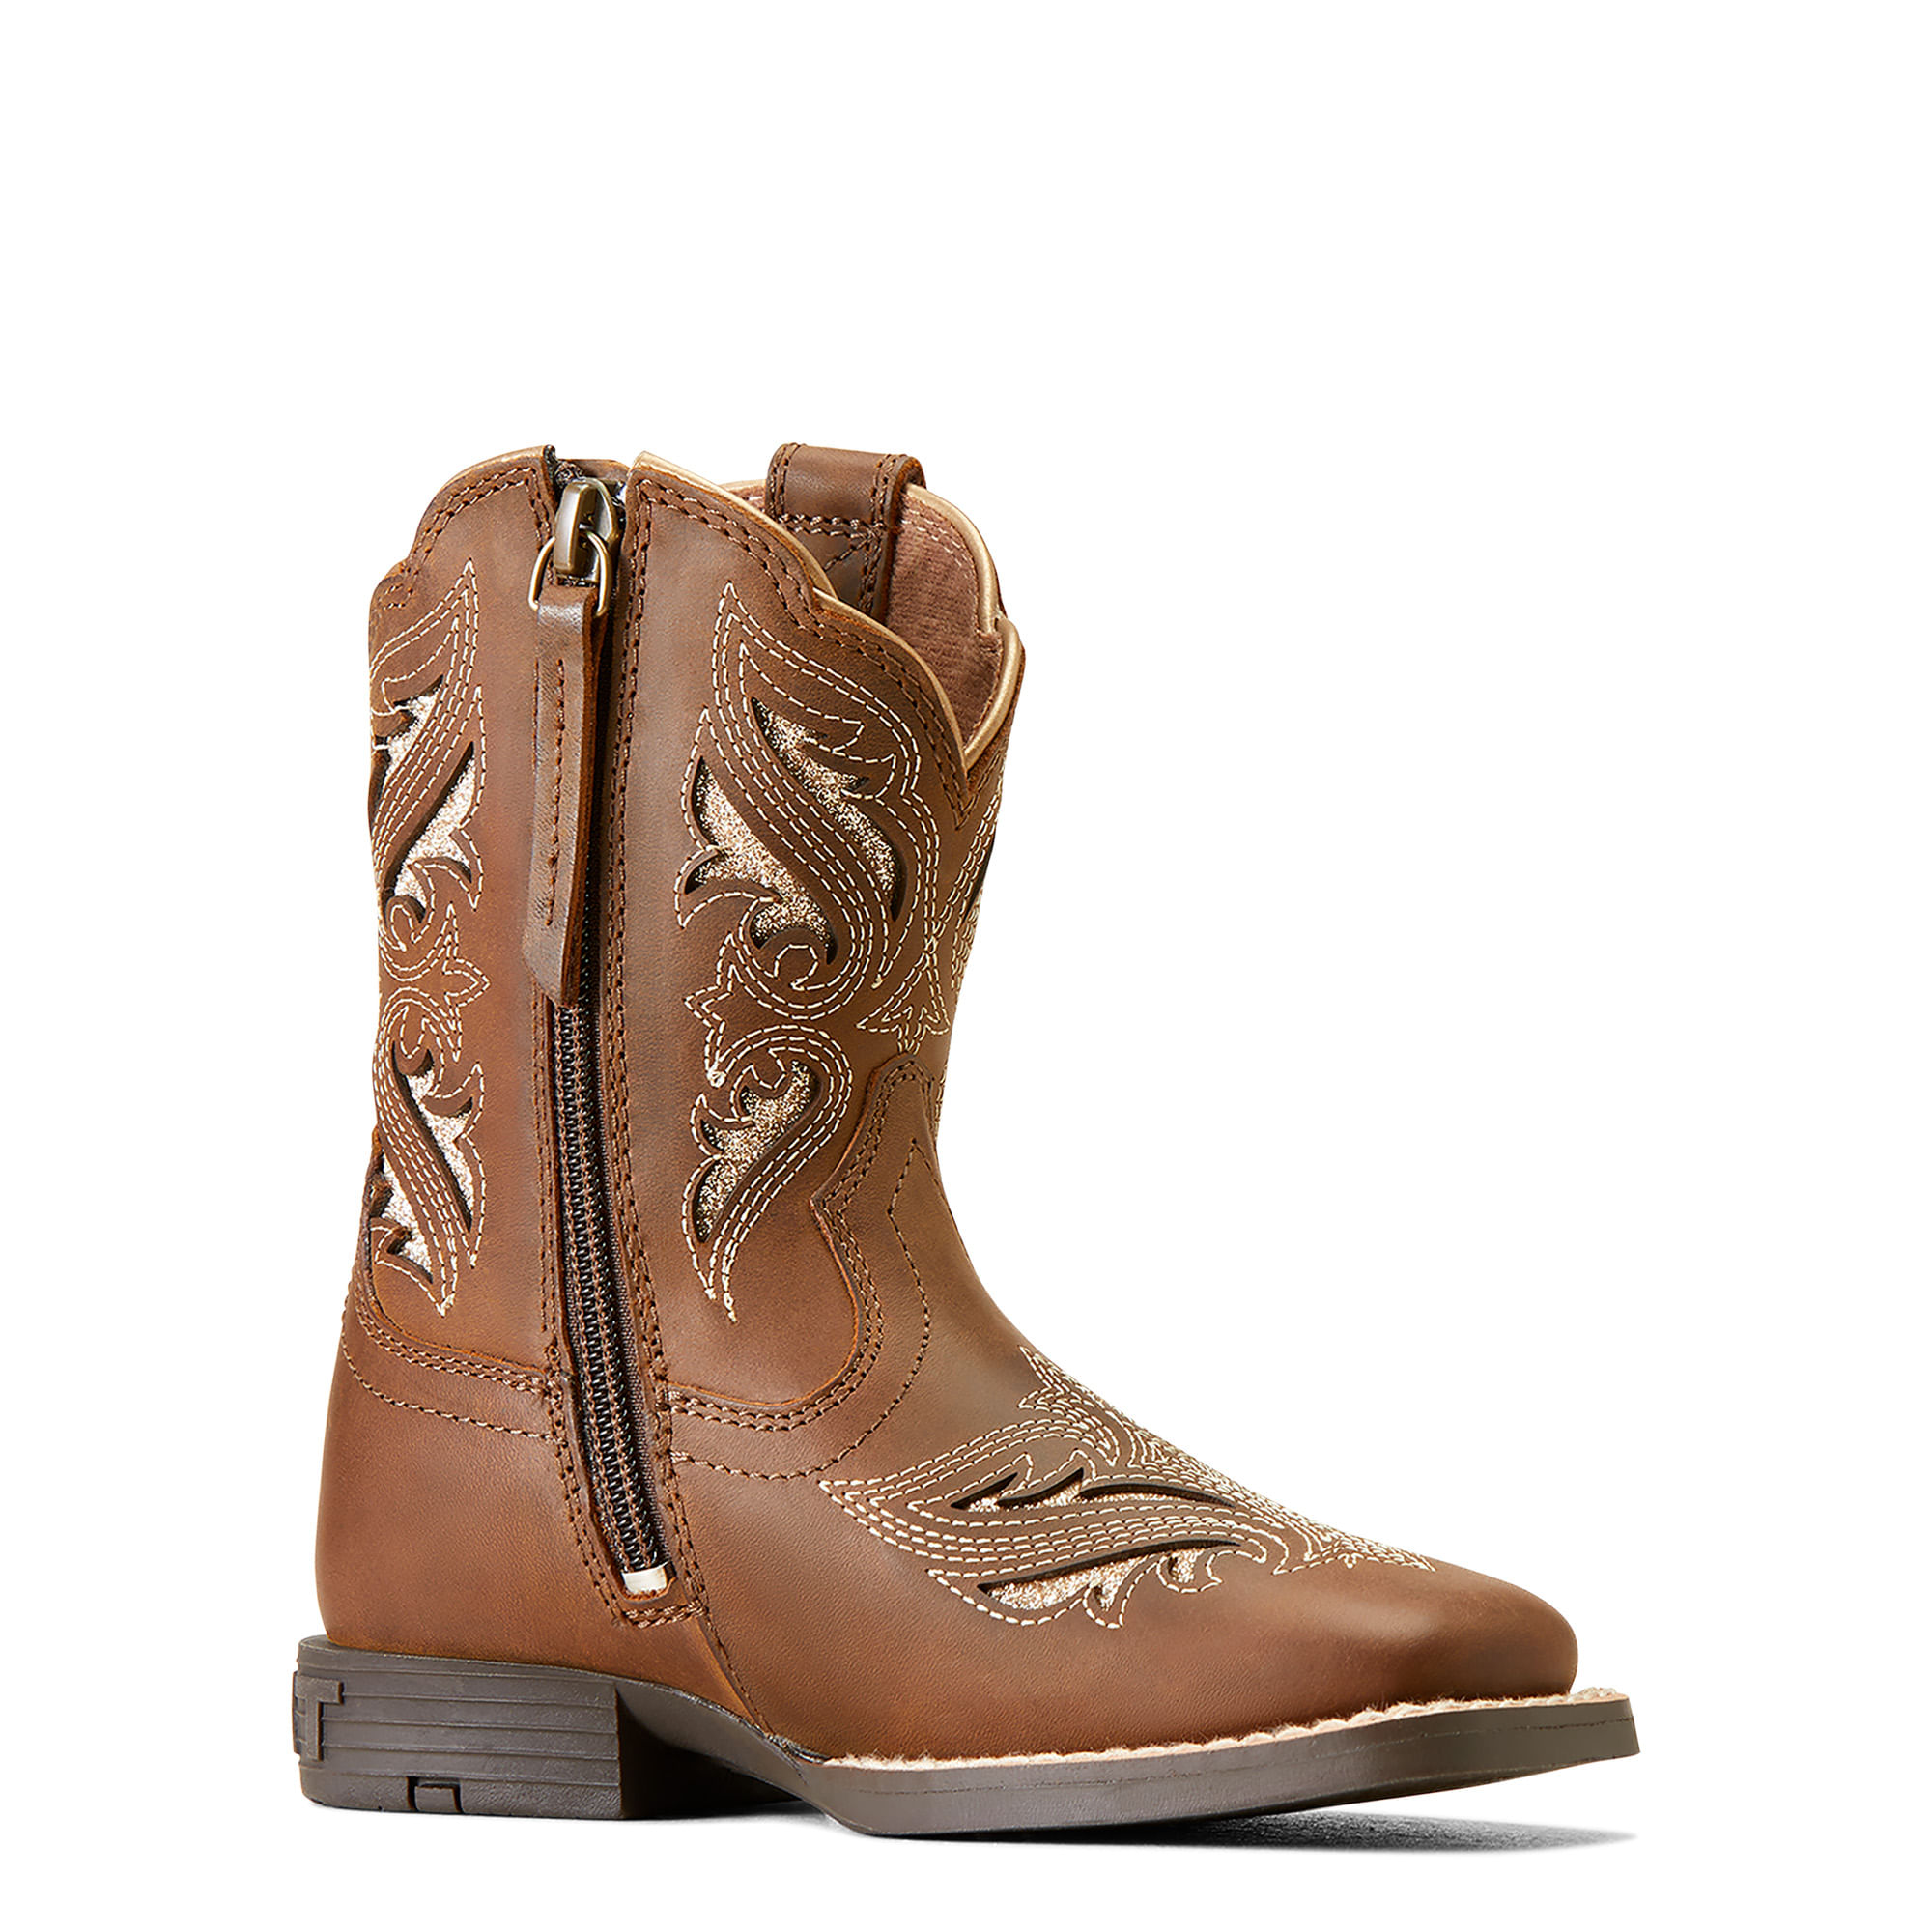 The Texas Boot Company - The Ariat Arena Rebound. $189.99 - Sign